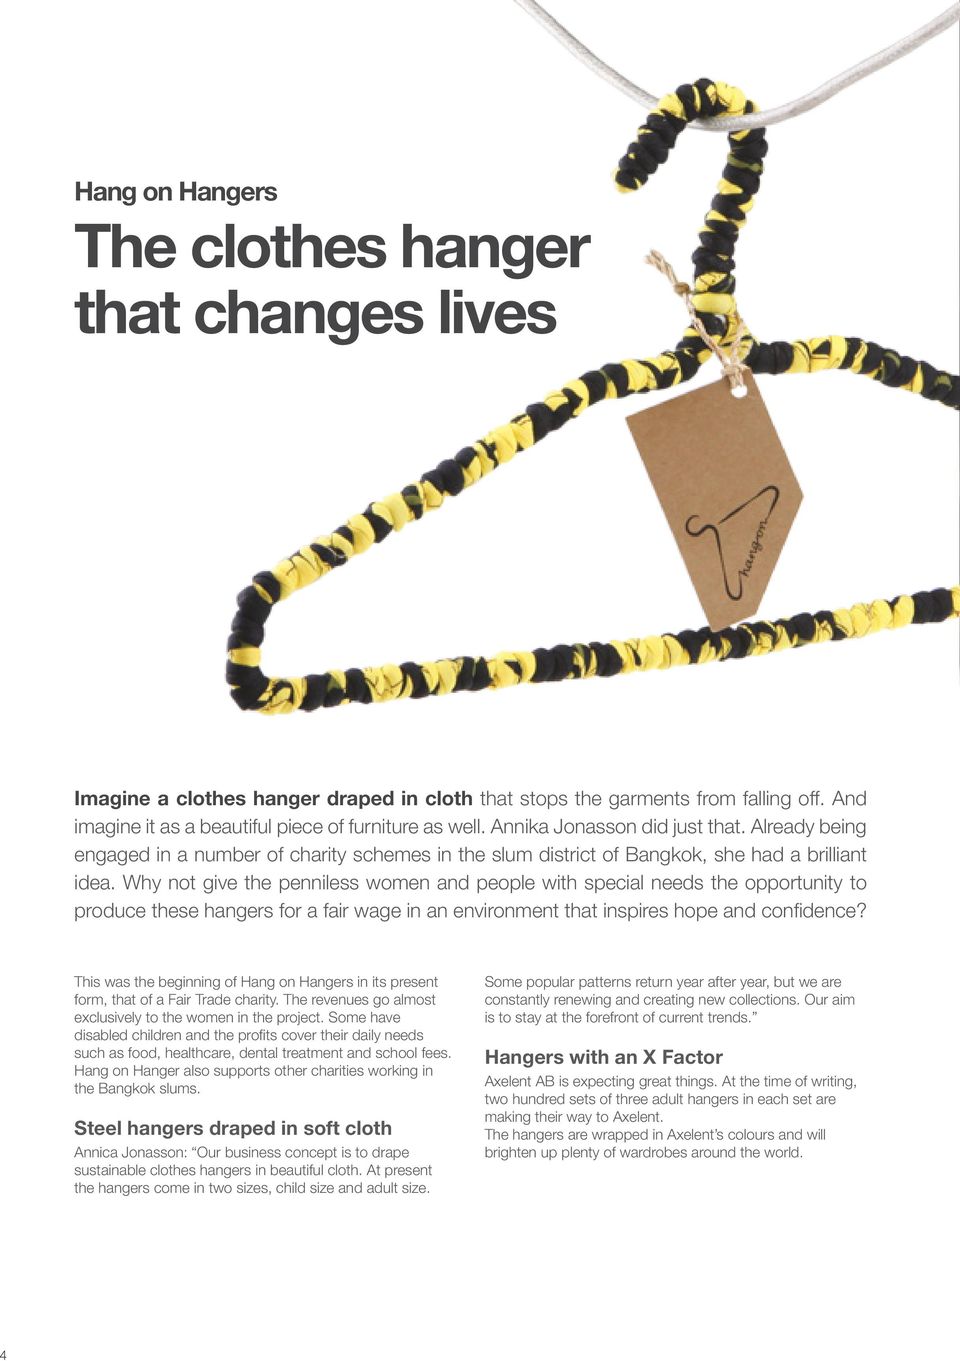 Why not give the penniless women and people with special needs the opportunity to produce these hangers for a fair wage in an environment that inspires hope and confidence?